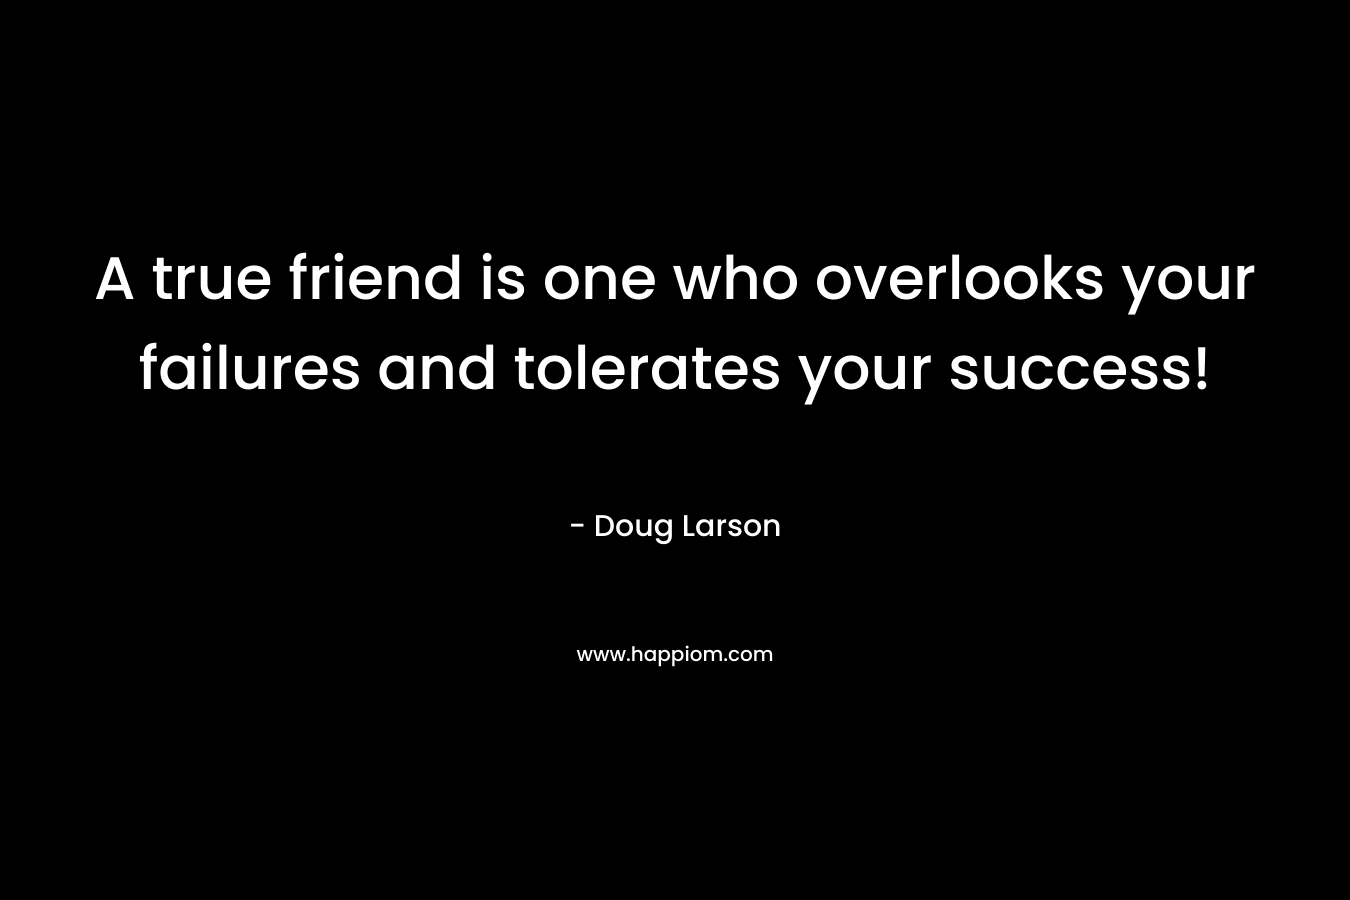 A true friend is one who overlooks your failures and tolerates your success! – Doug Larson